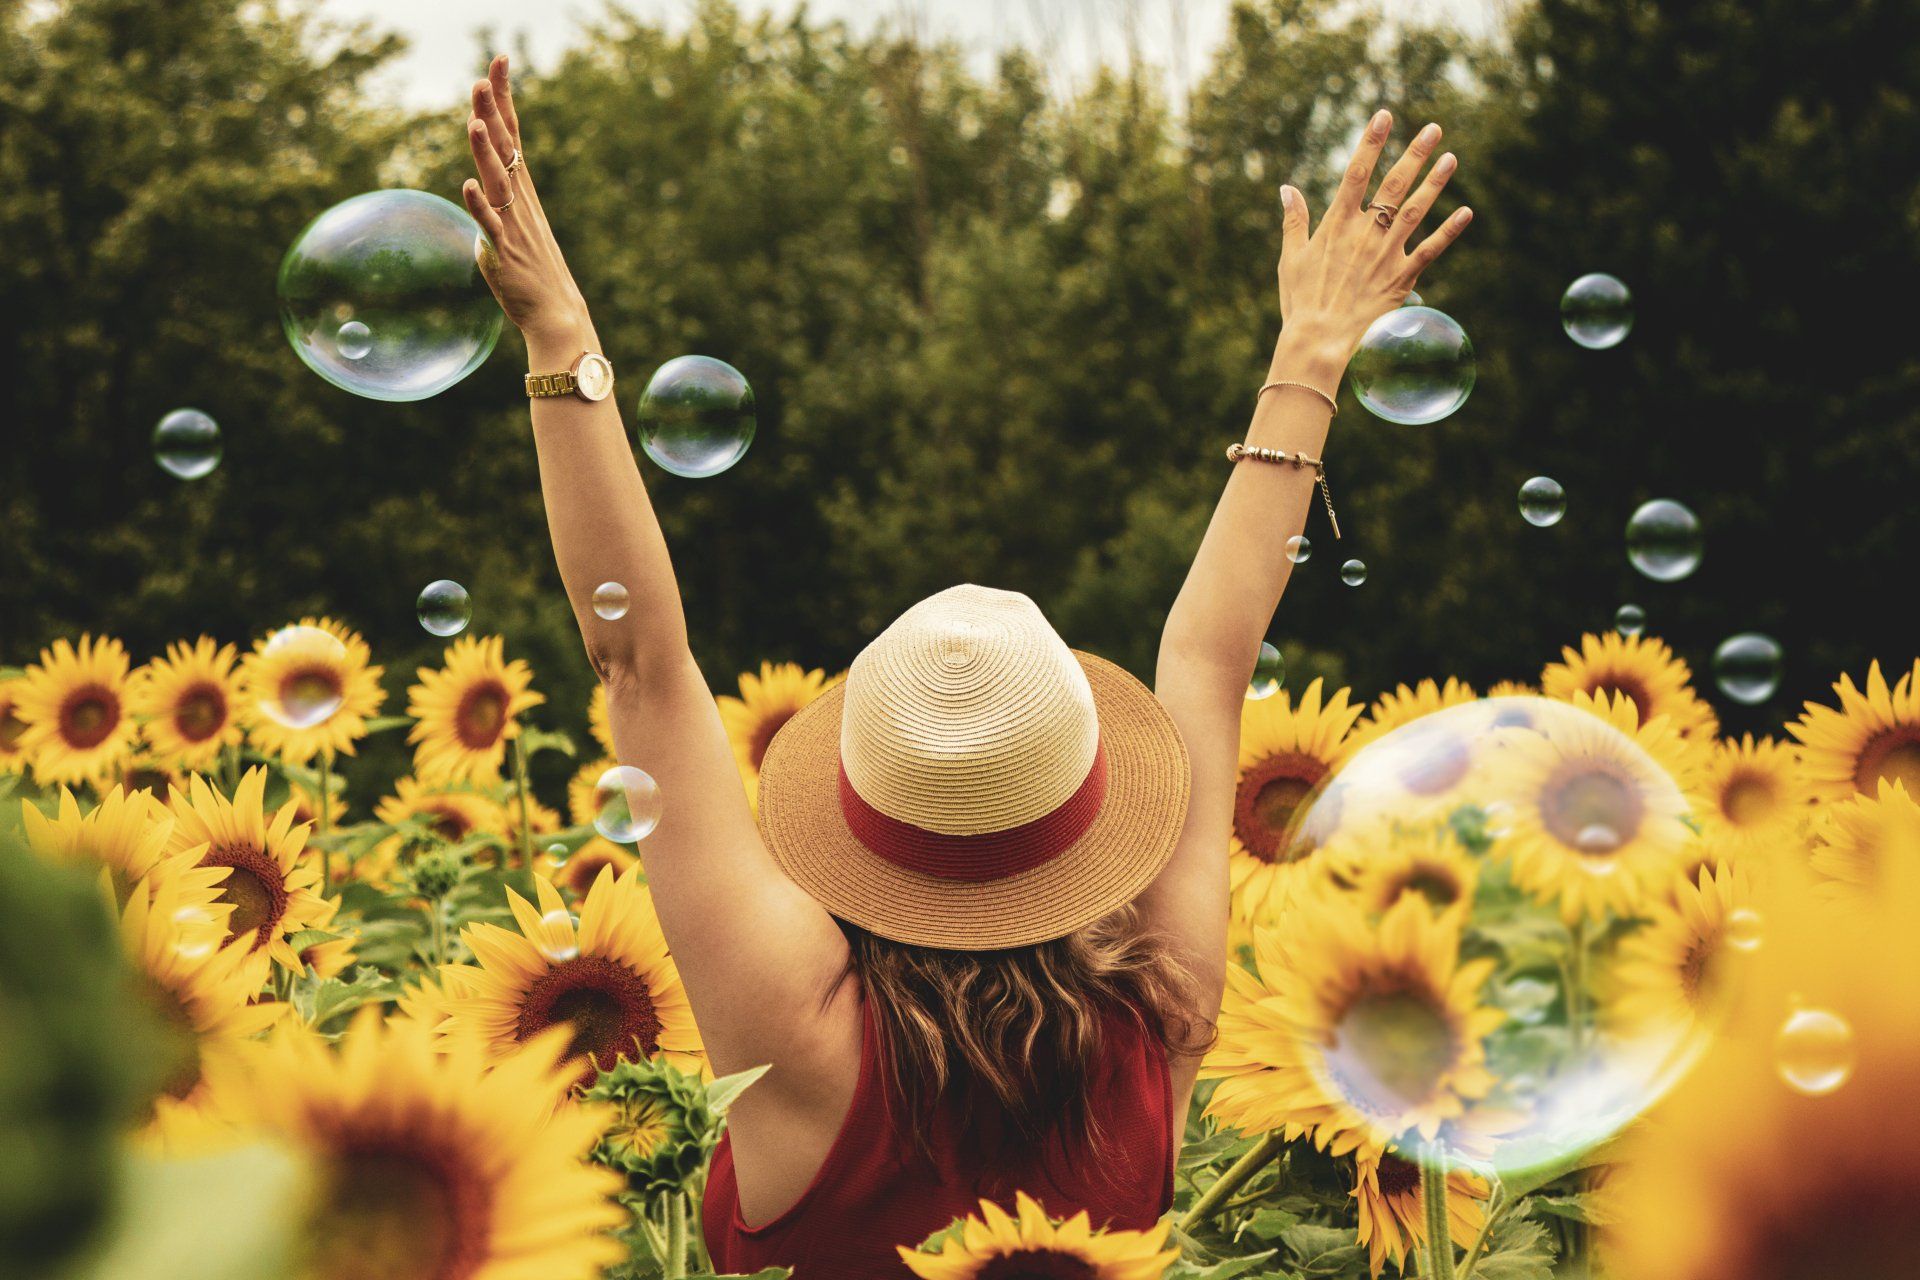 Woman wearing a hat  in a field of sunflowers, with her hands held high, while bubbles float across the field